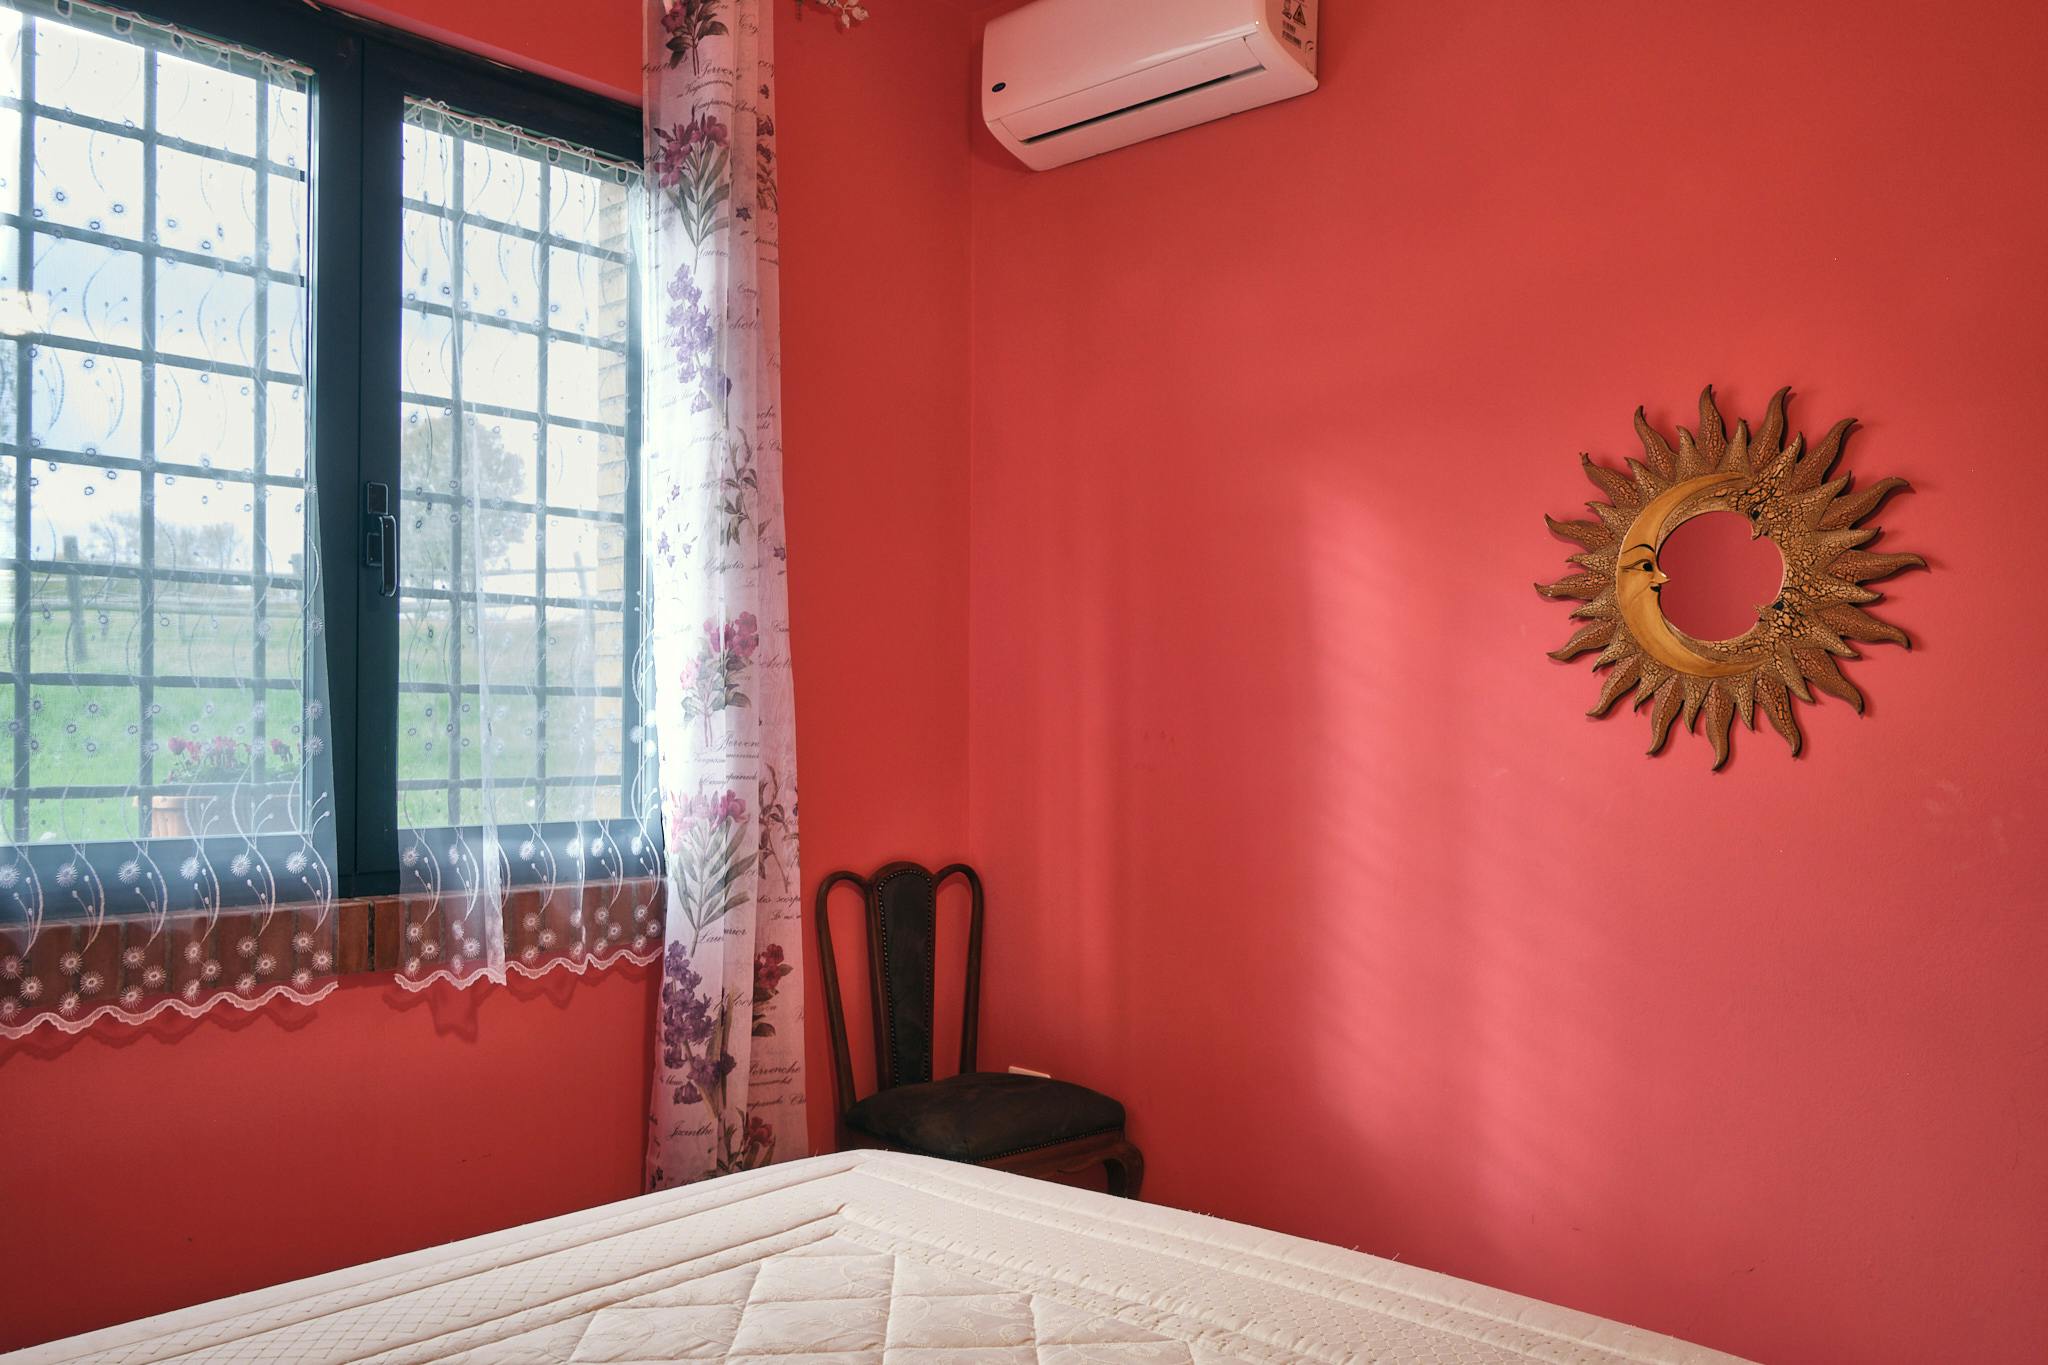 Air Conditioning in the Double Room